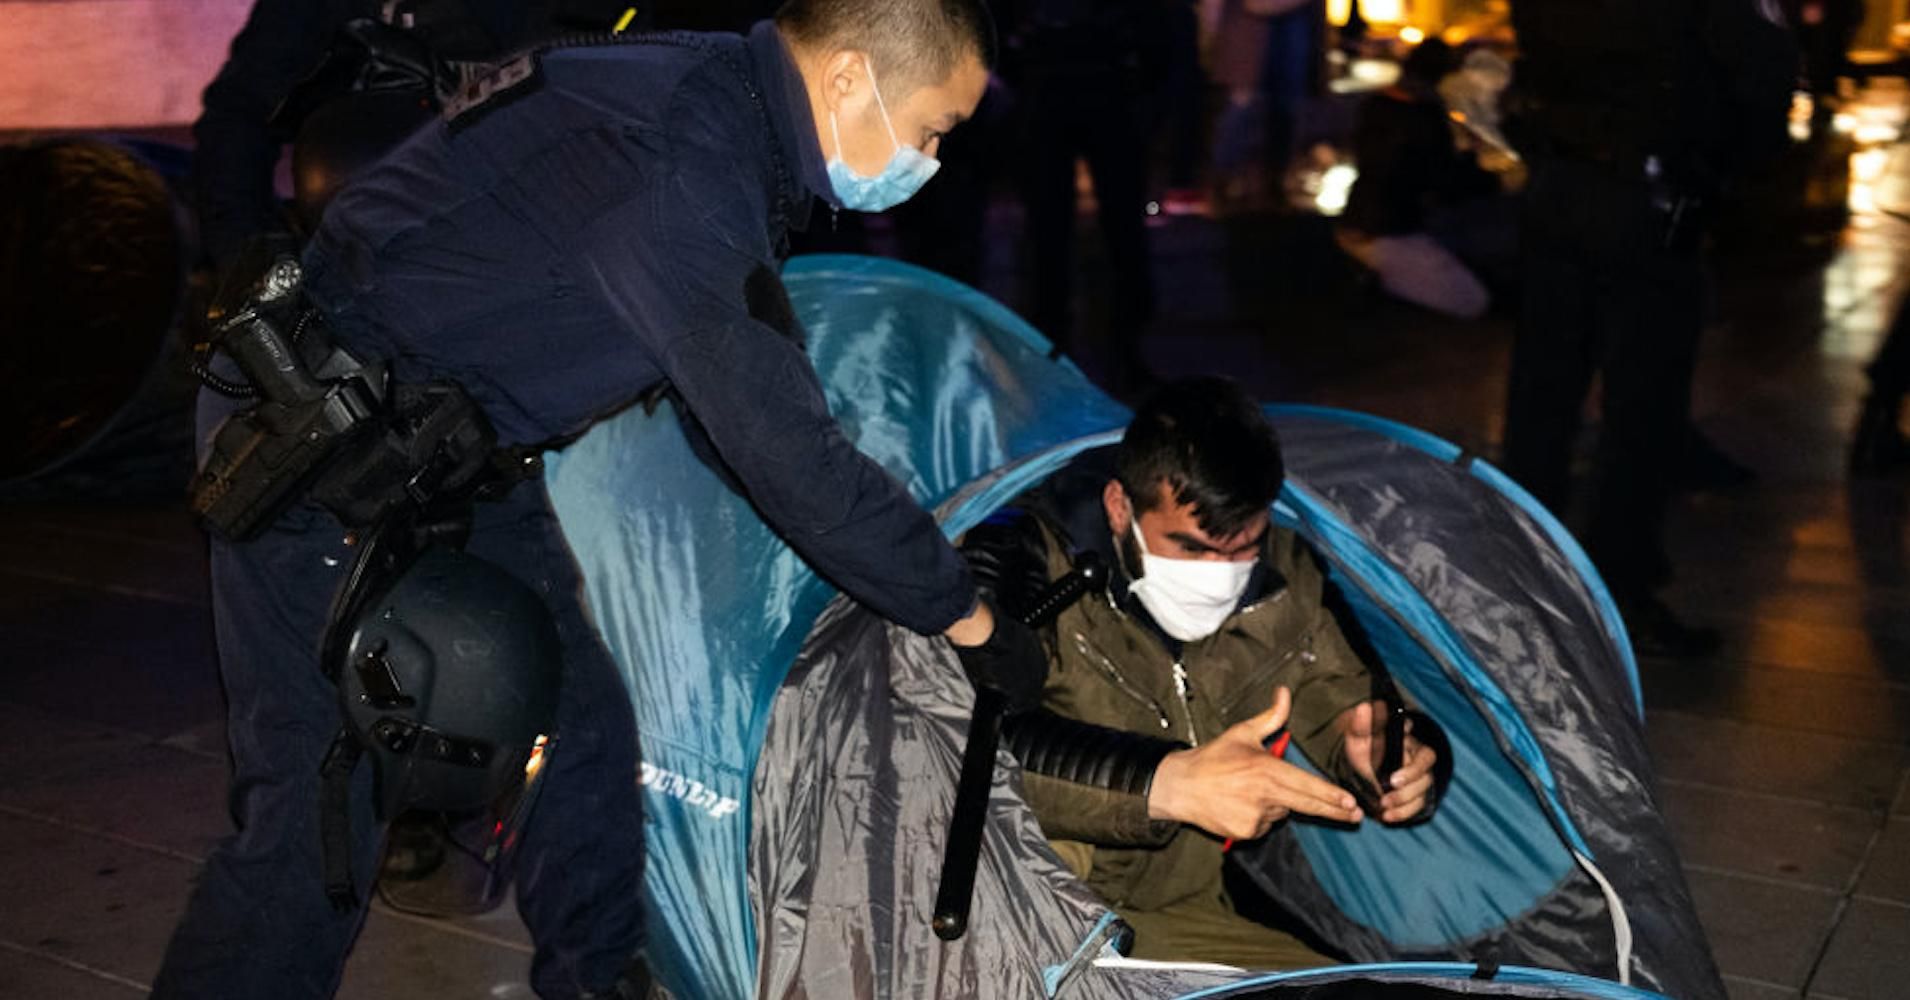 A French police officer evicts a migrant from a tent in Place de la République in Paris on November 23, 2020. (Photo: Jerome Gilles/NurPhoto via Getty Images)